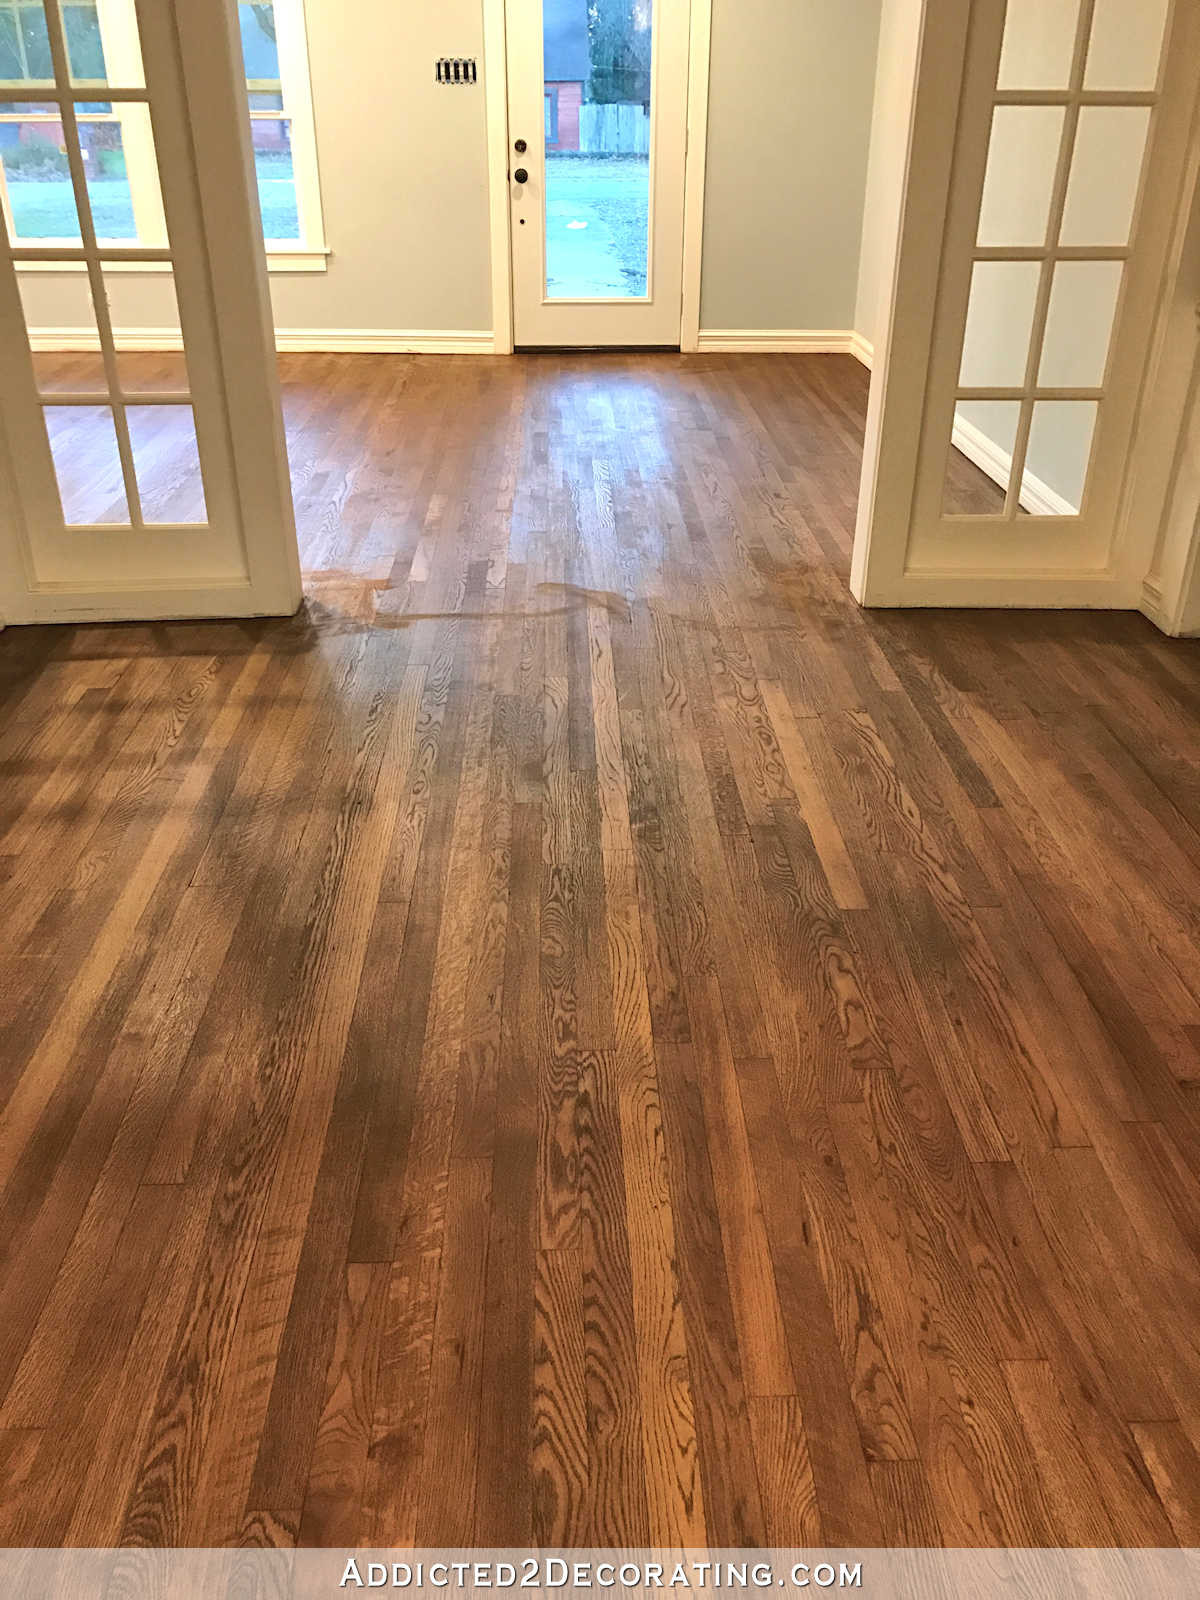 16 Spectacular How to Finish Hardwood Floors 2022 free download how to finish hardwood floors of adventures in staining my red oak hardwood floors products process within staining red oak hardwood floors 9 stain on entryway and music room floors